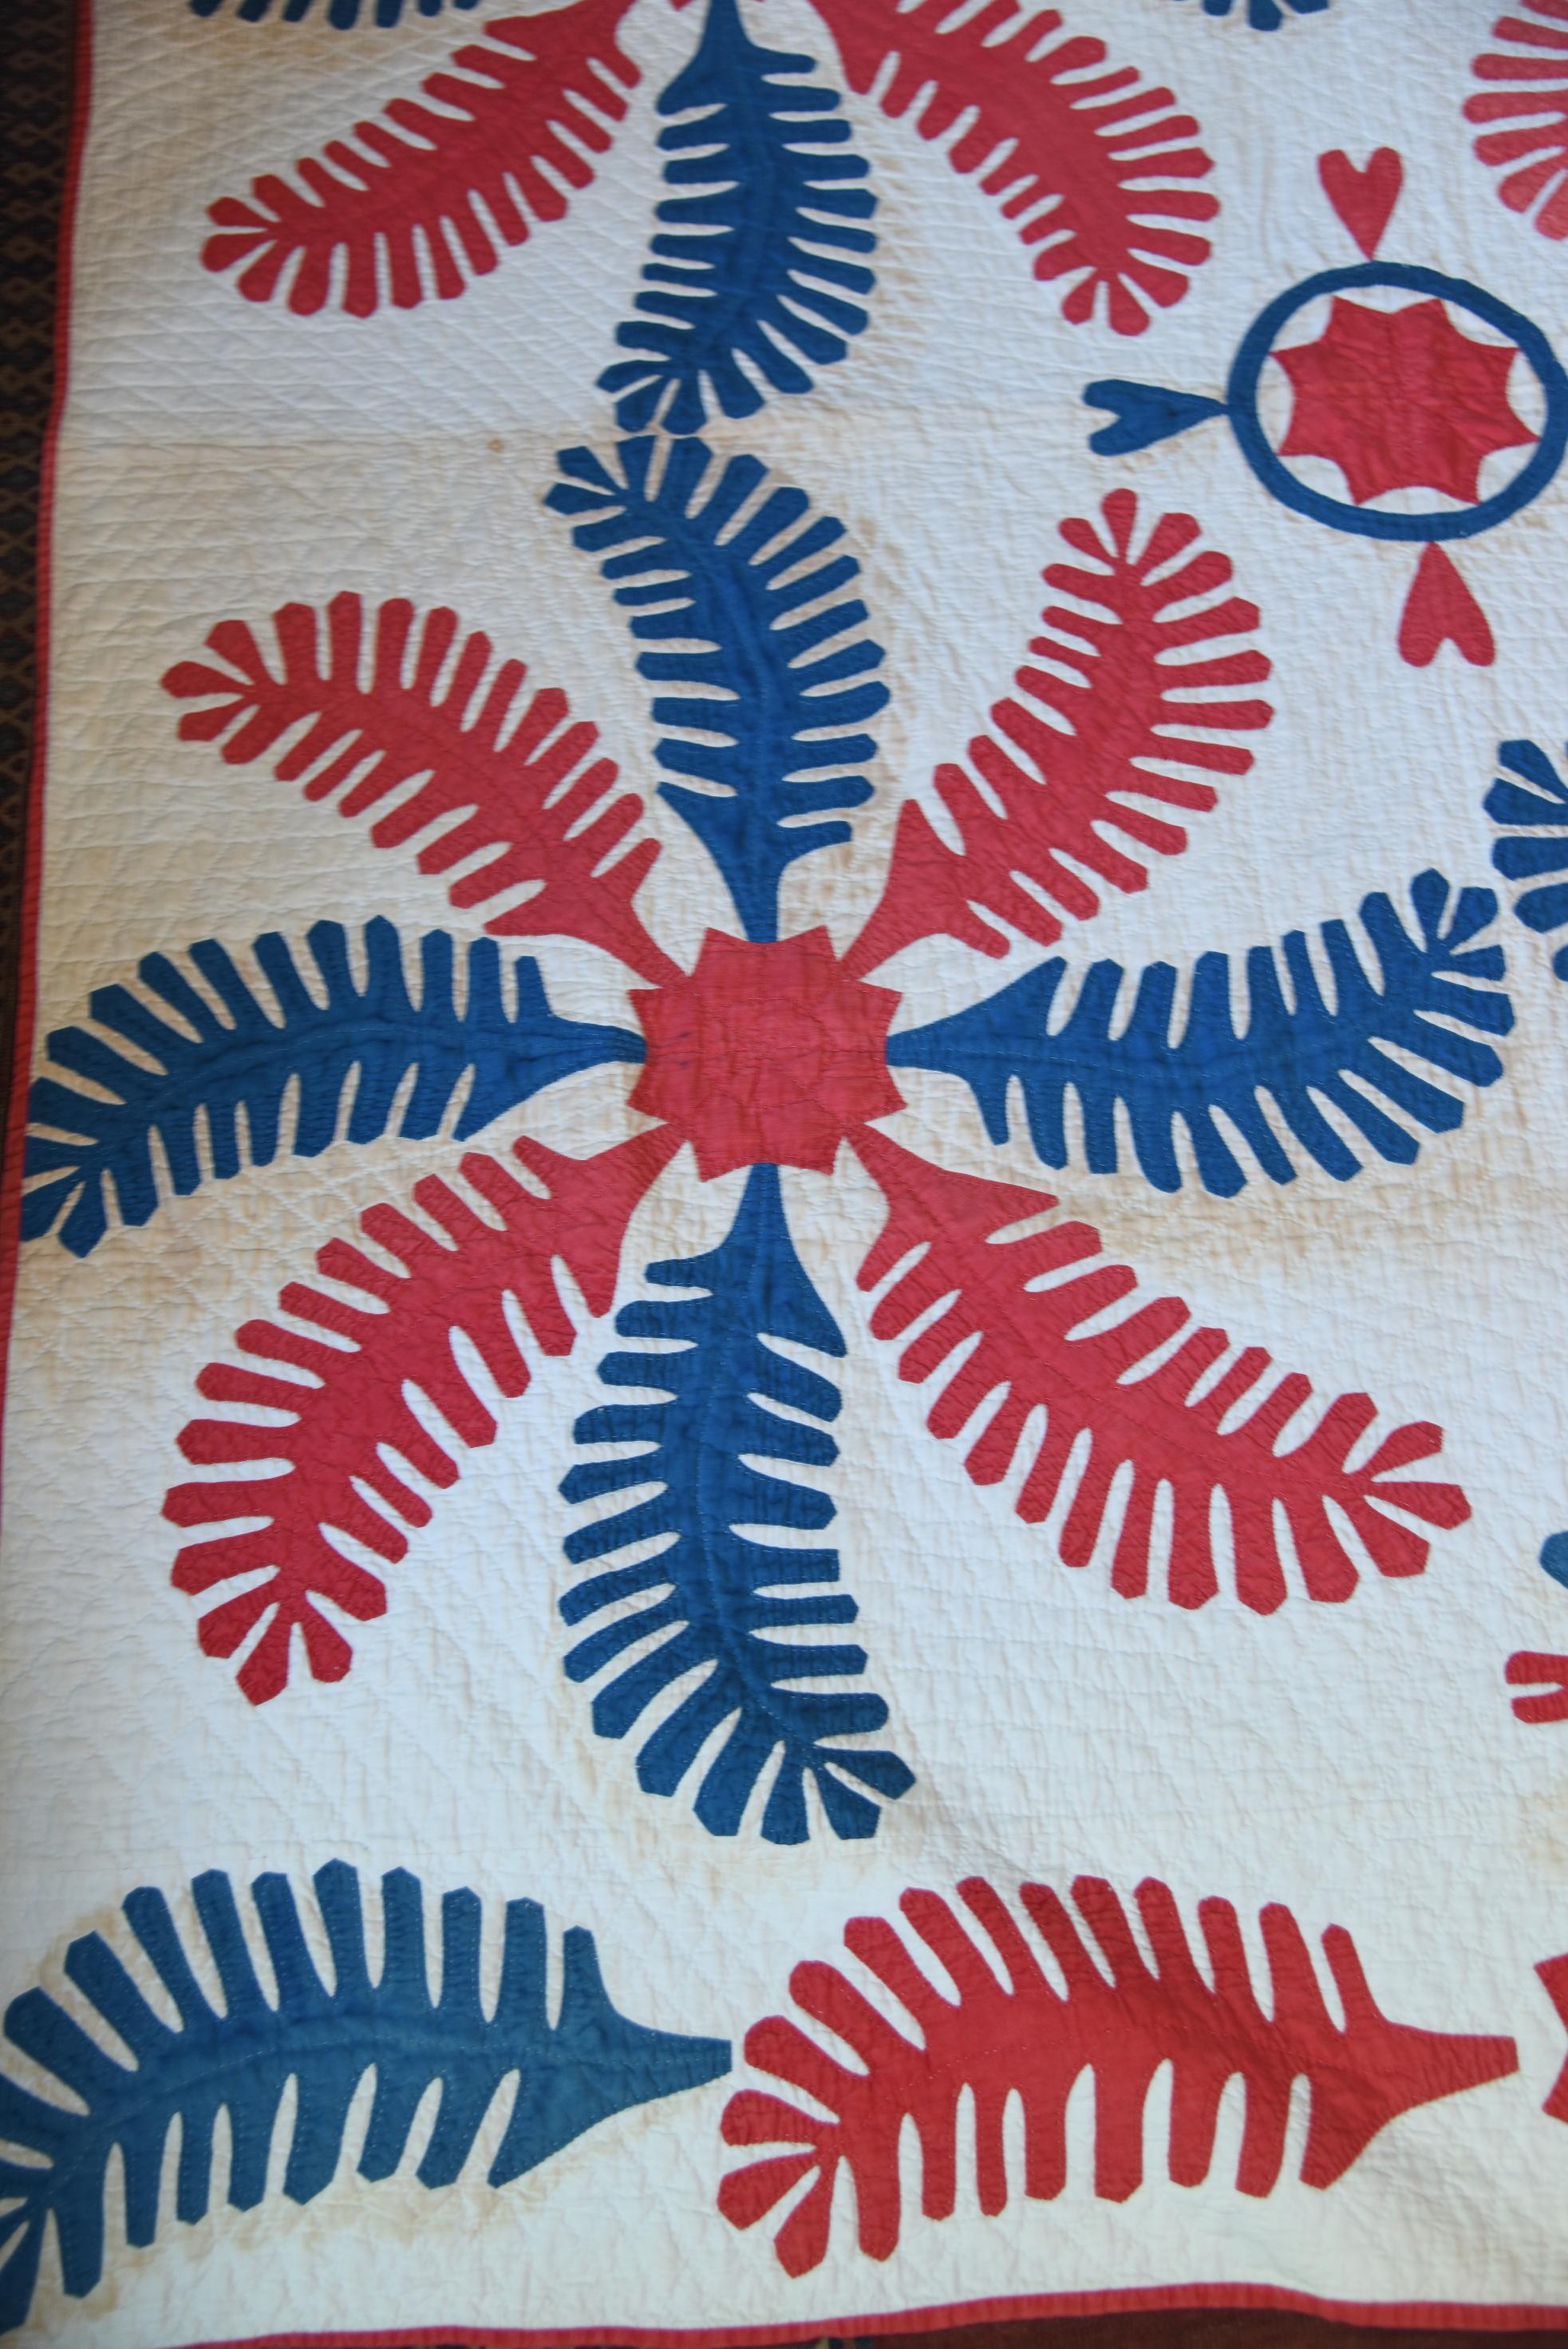 Lot #536 - Gorgeous American red, white, and blue floral applique “Princess Feather” pattern